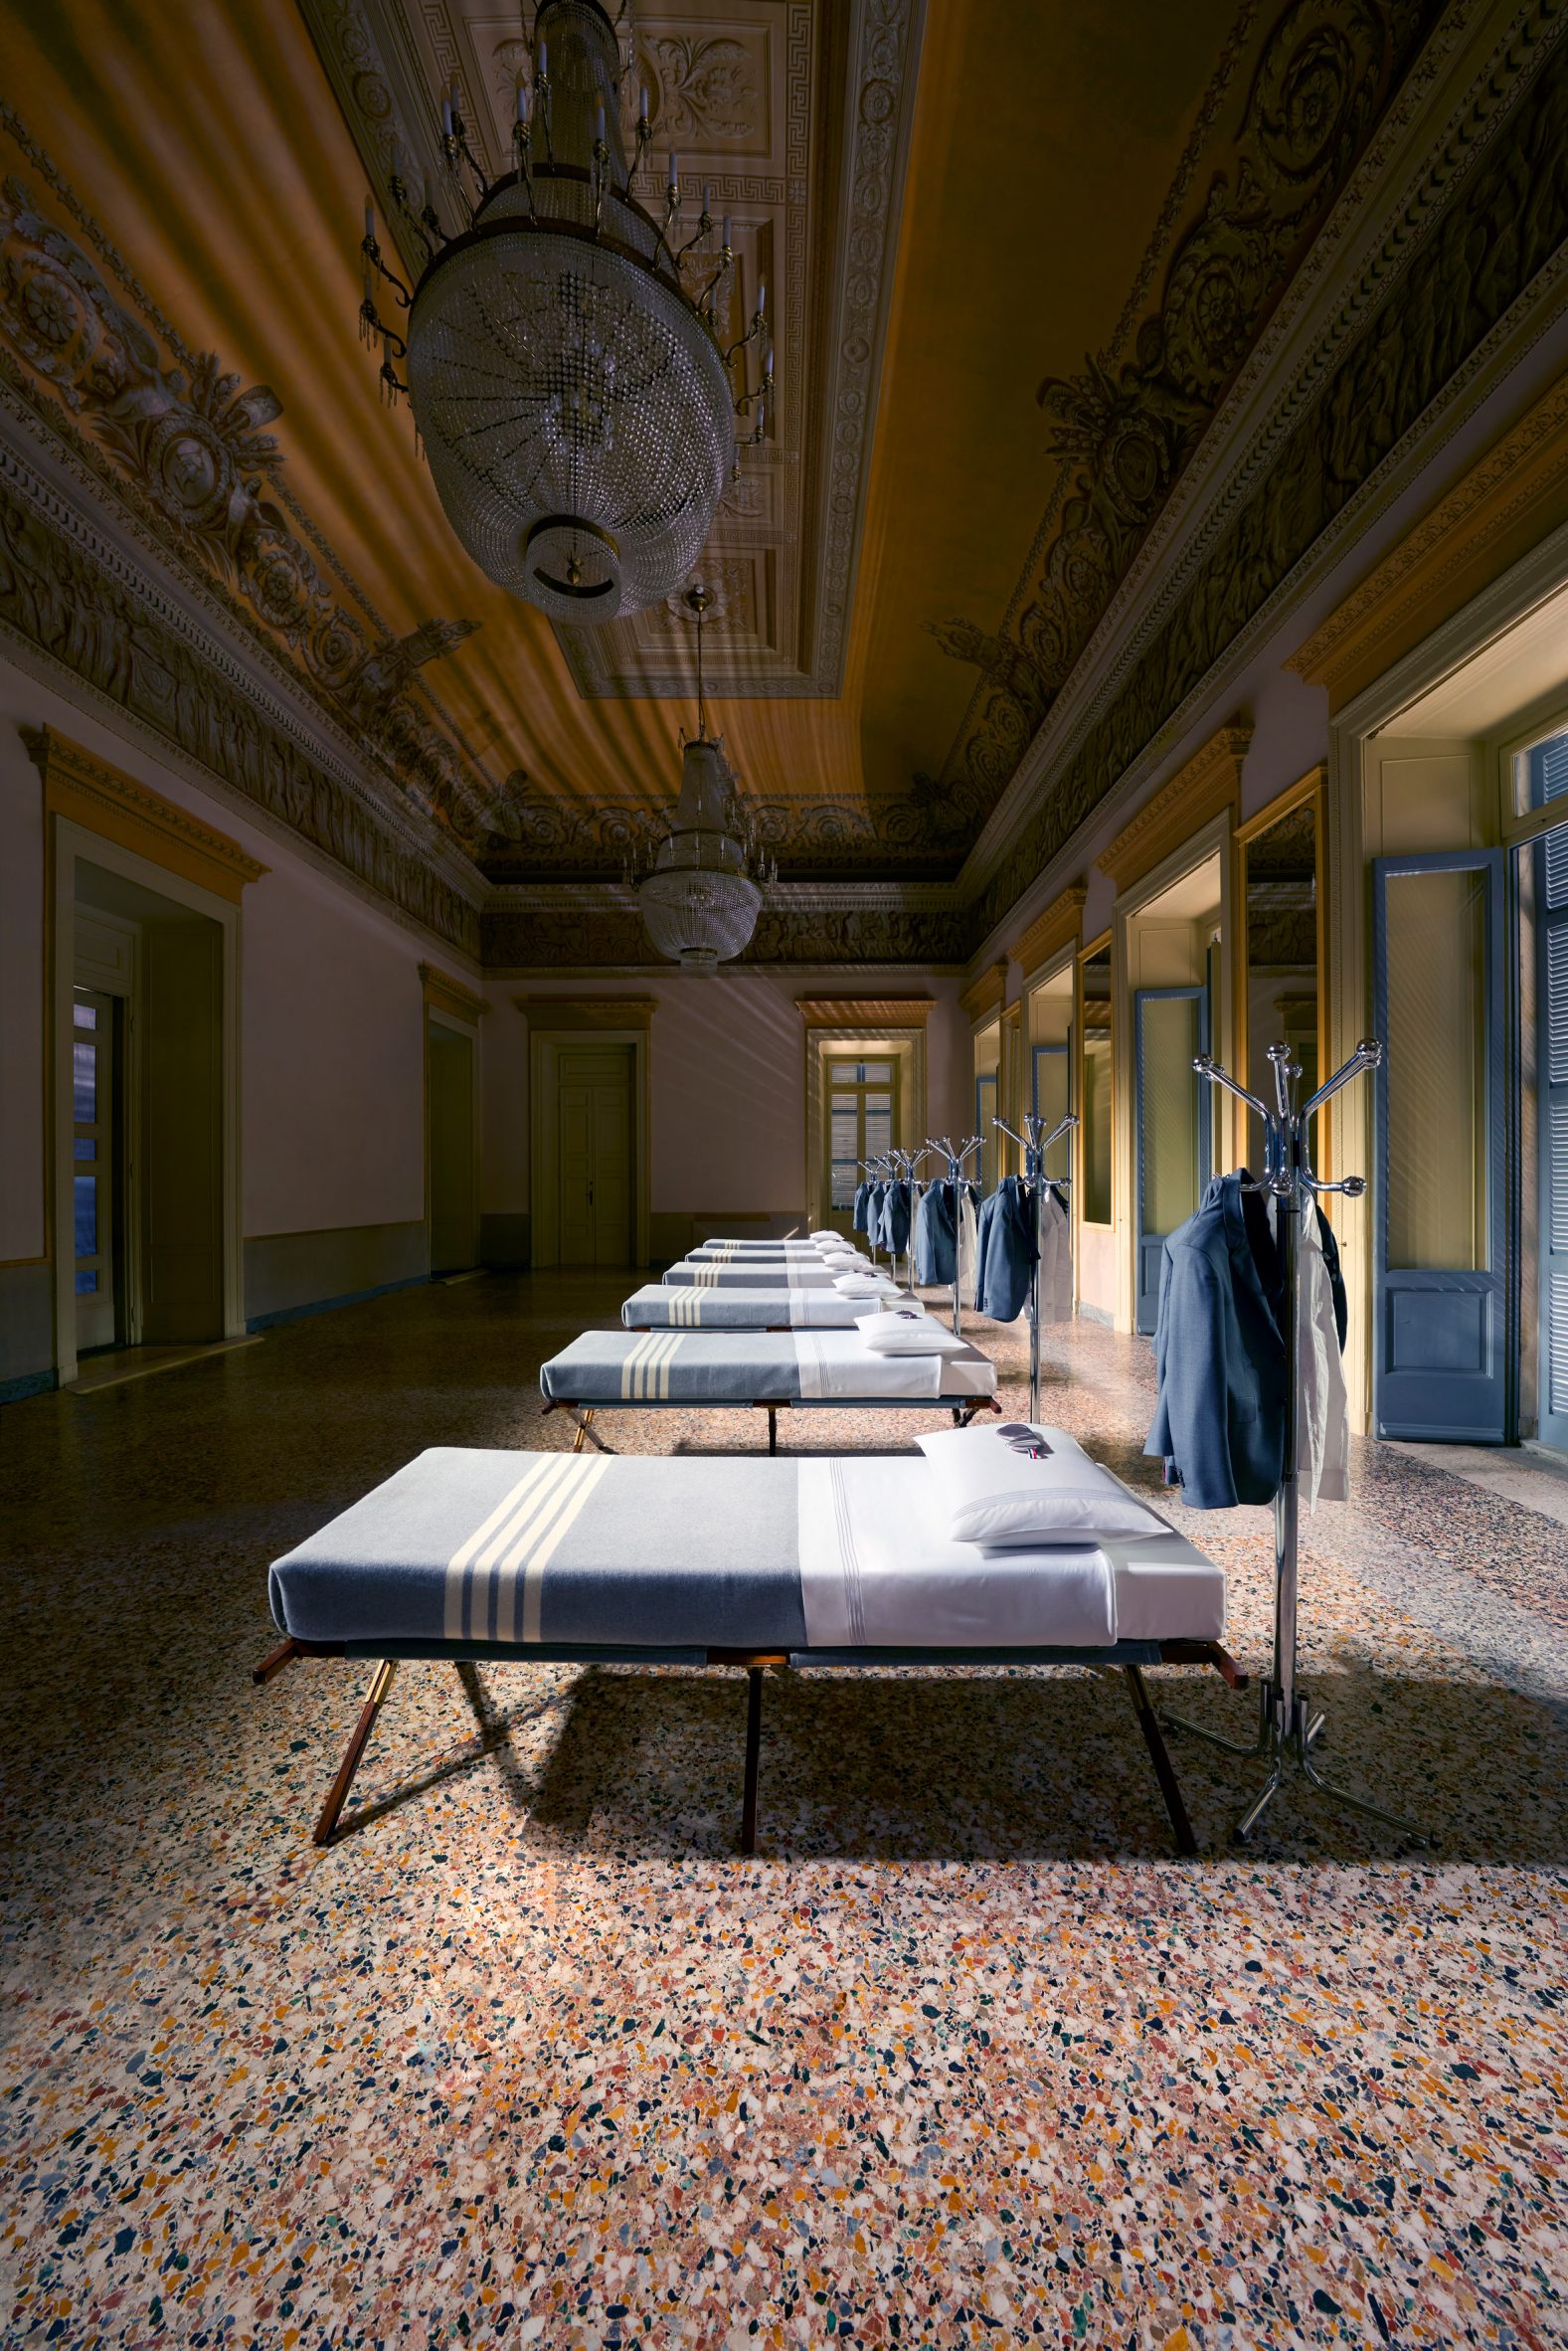 Row of beds set up inside a neoclassical palazzo